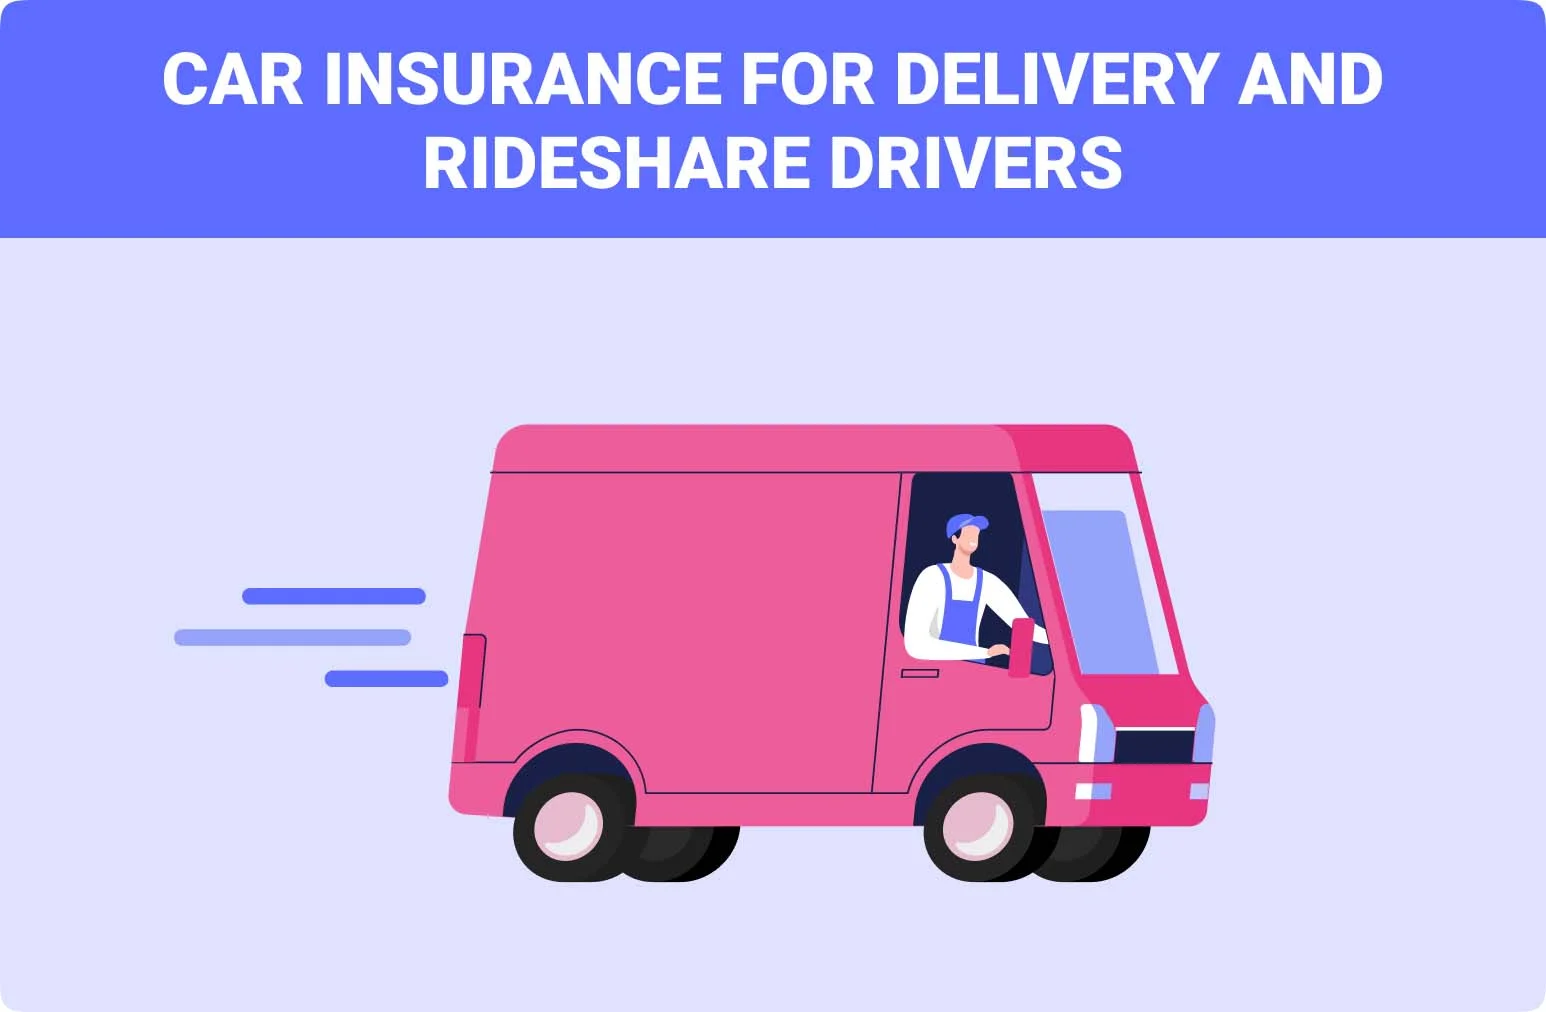 Car insurance for rideshare and delivery drivers